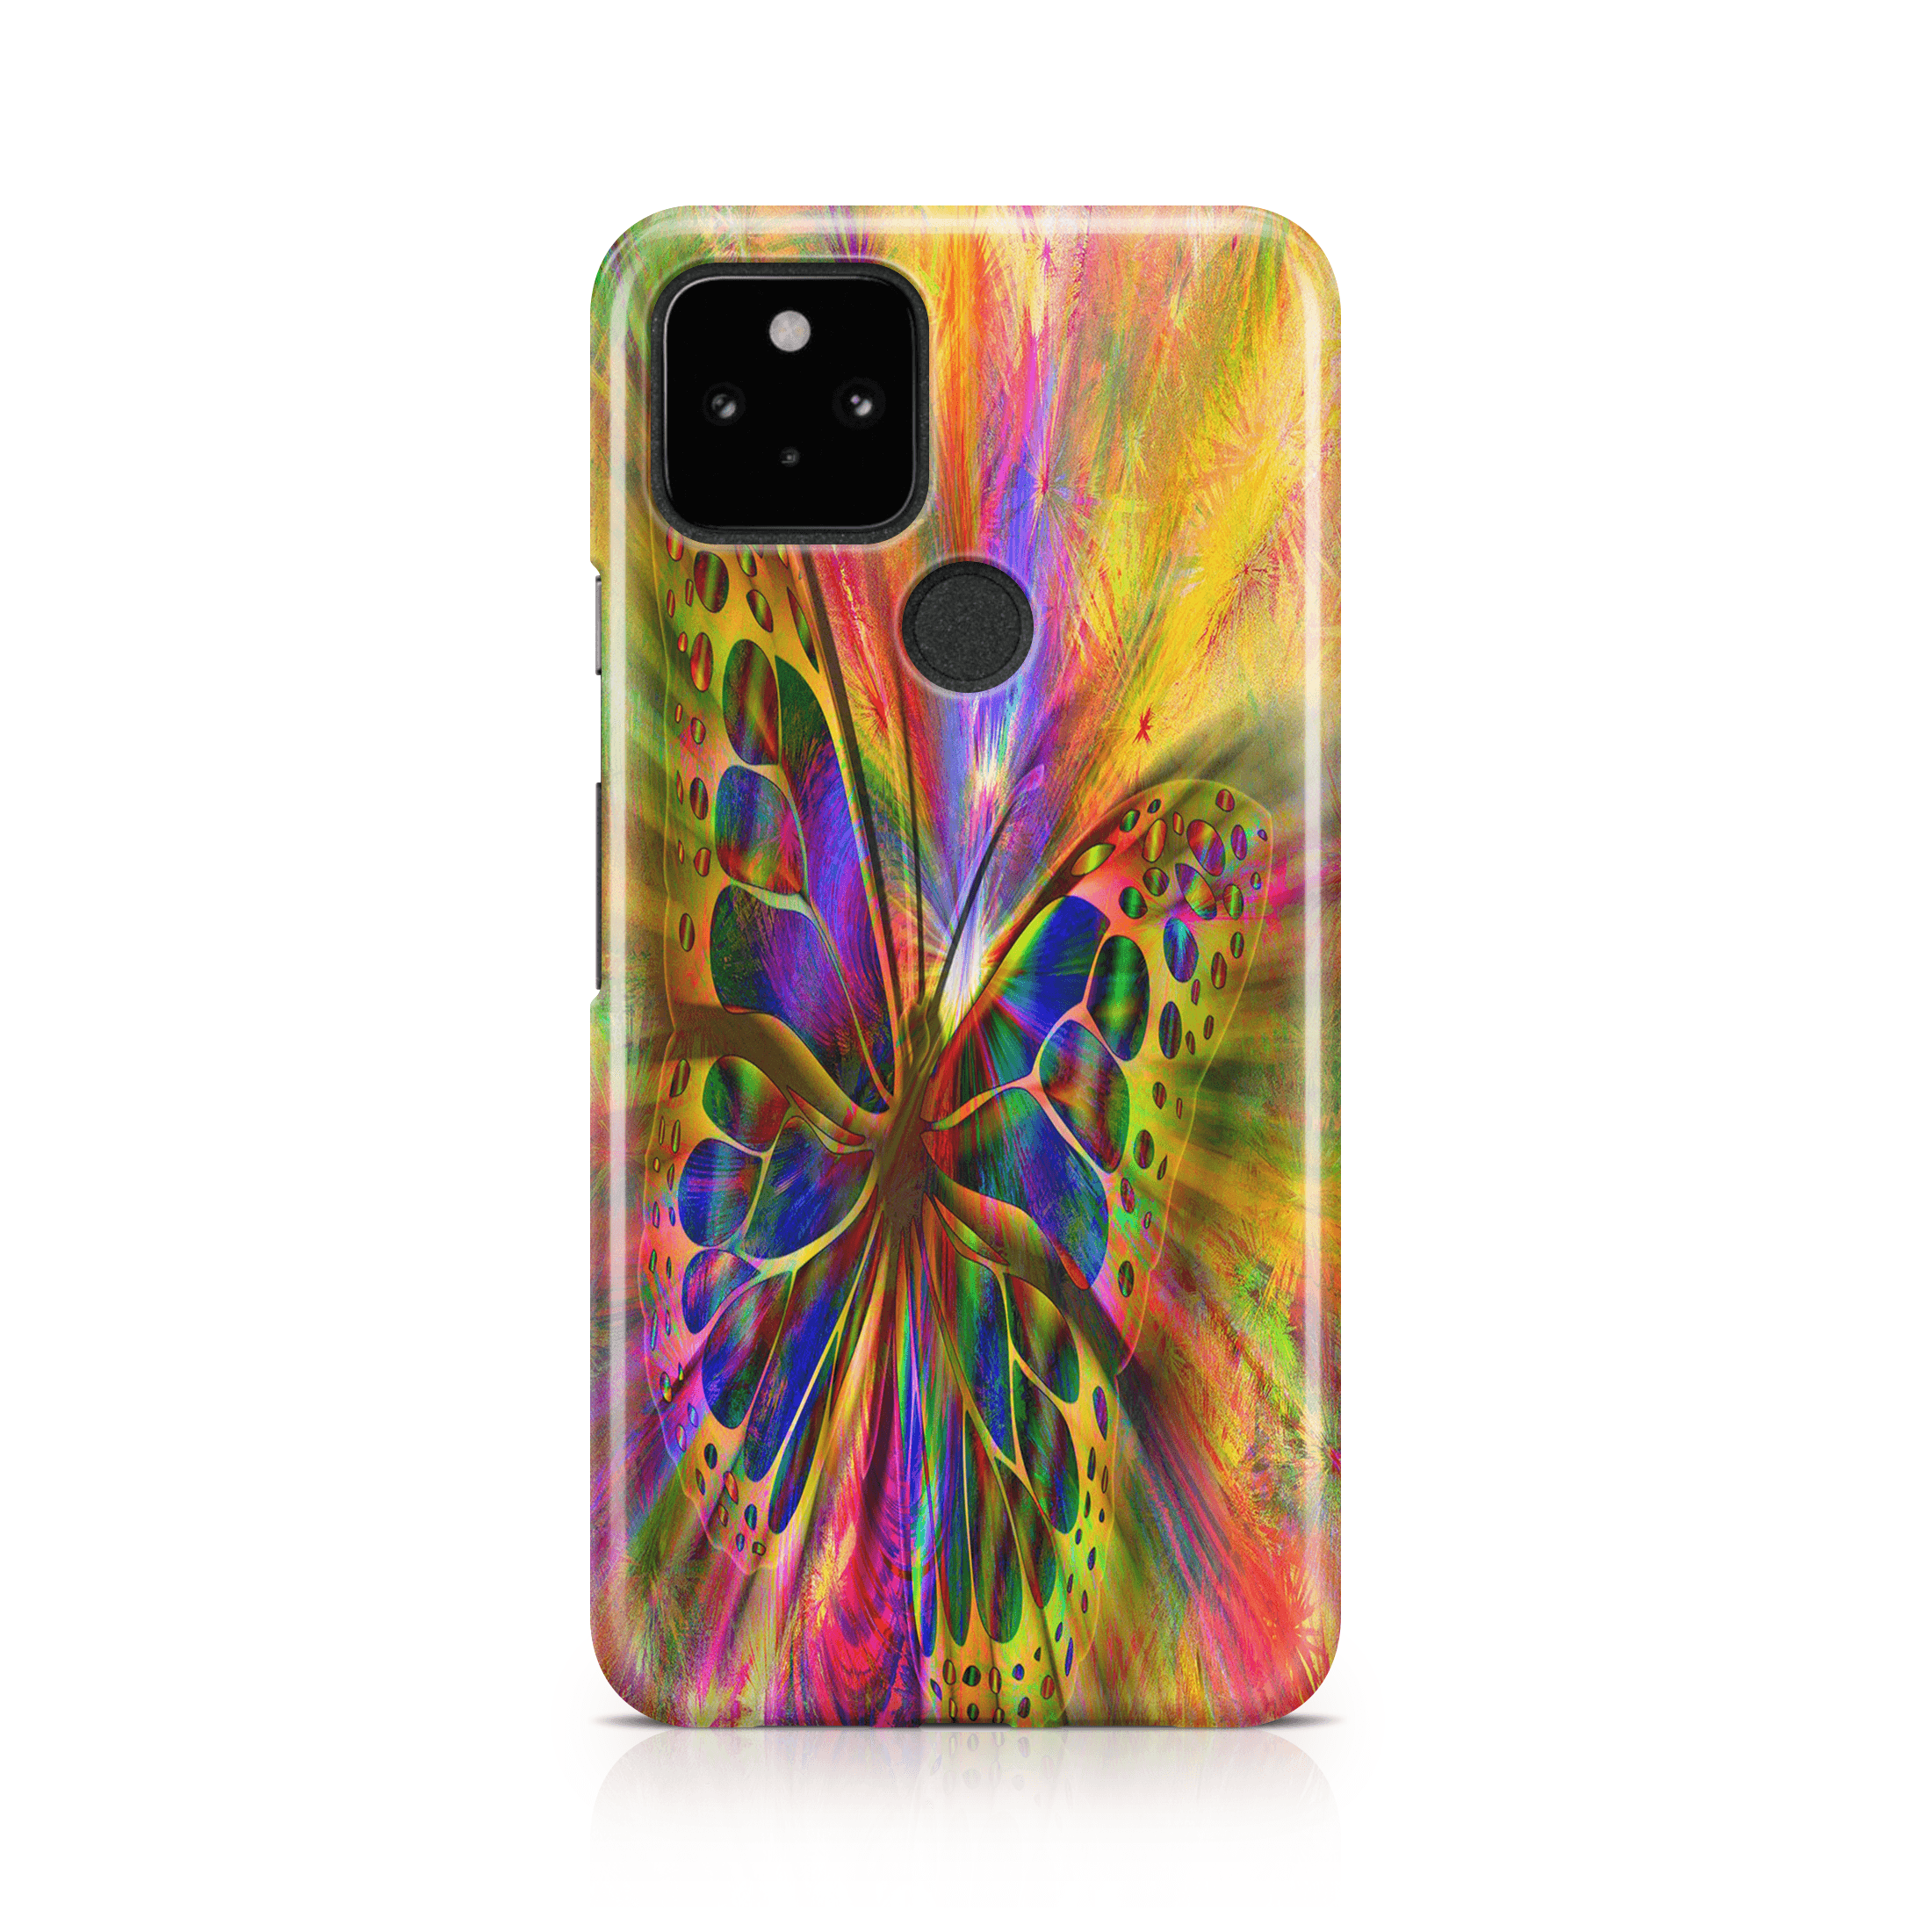 Butterfly - Google phone case designs by CaseSwagger